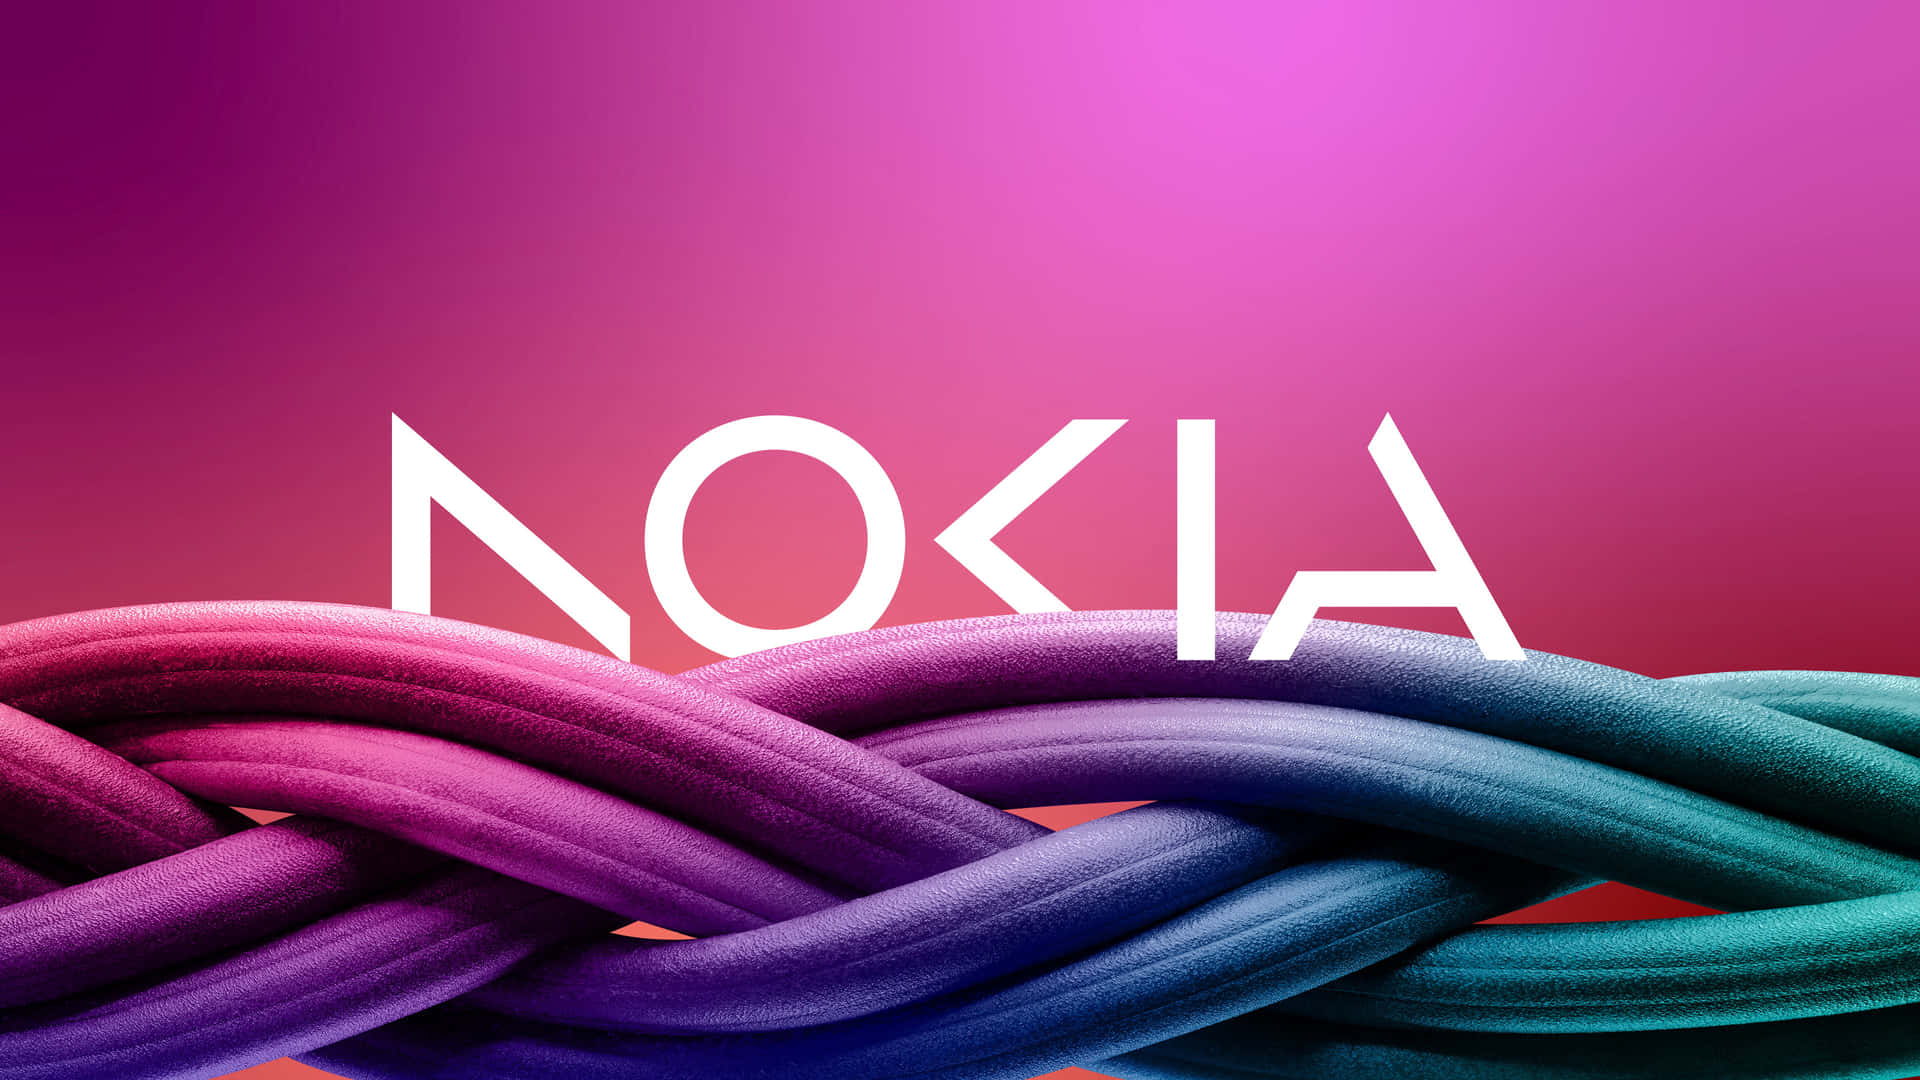 Enjoy the freedom of powerful motion with Nokia